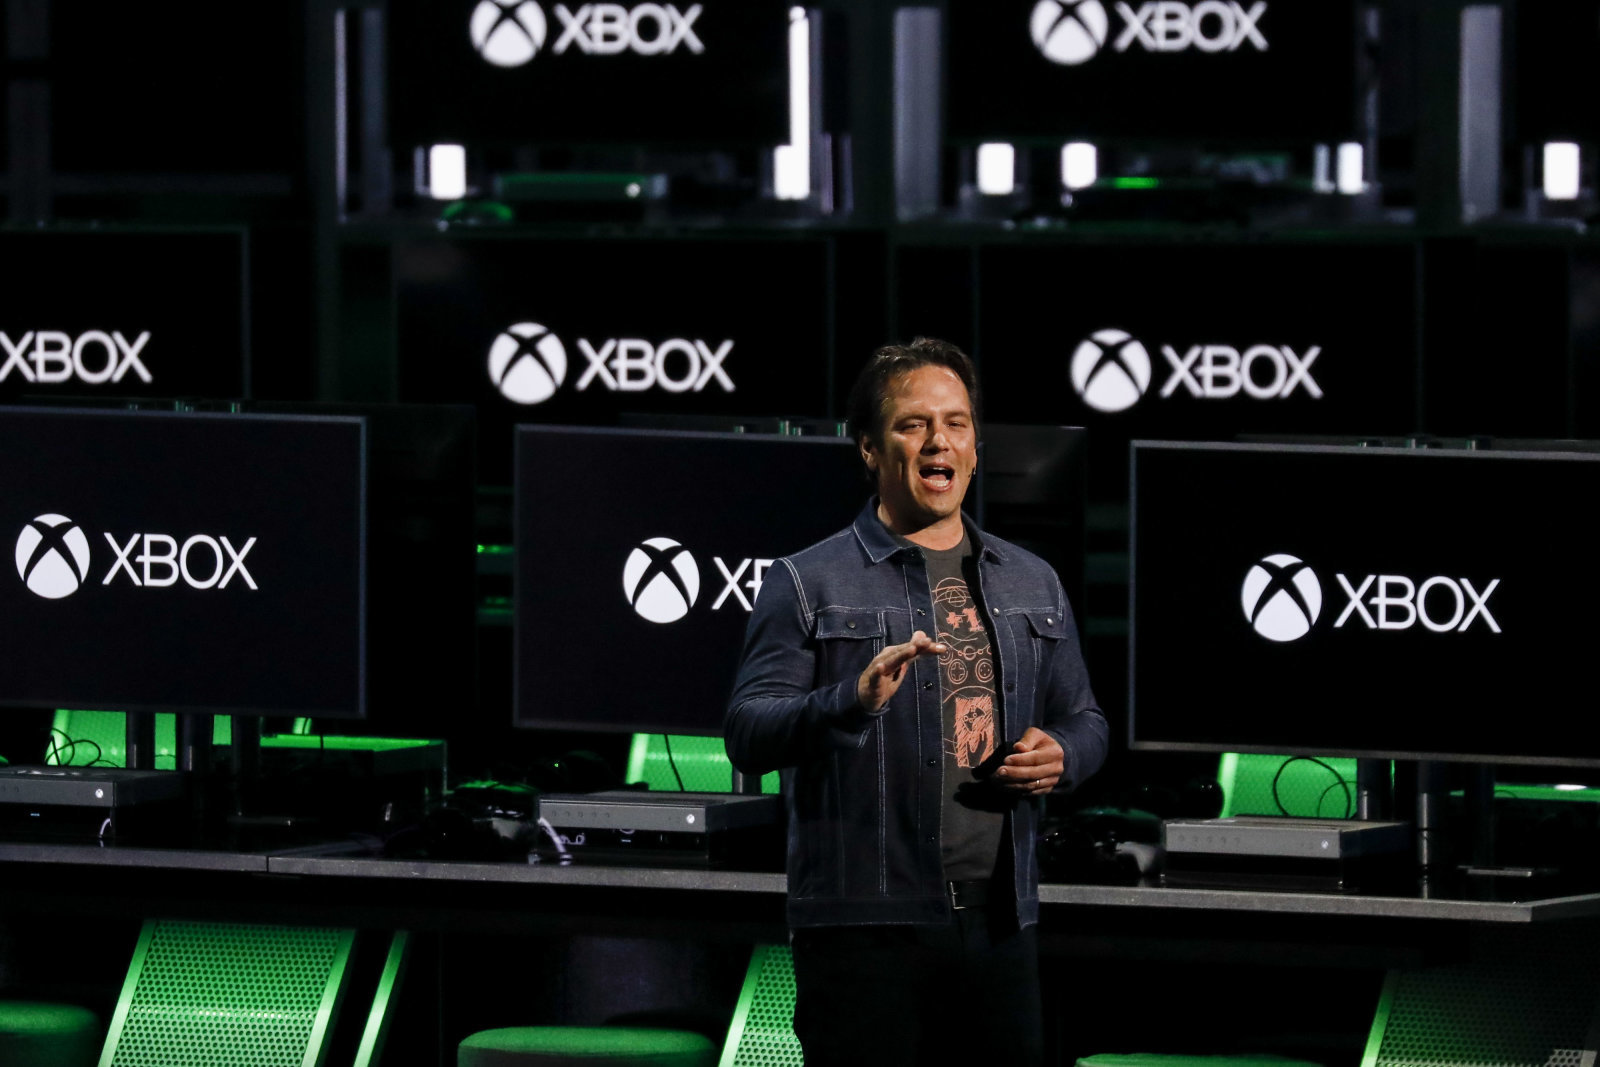 Phil Spencer, executive vice president of Gaming for Microsoft Corp., speaks during the company's Xbox event ahead of the E3 Electronic Entertainment Expo in Los Angeles, California, U.S., in Los Angeles, California, U.S., on Sunday, June 10, 2018. Xbox previewed a flurry of new titles and deals with studios as the video-gaming division of Microsoft looks to compete more intensely with Sony Corp.'s PlayStation and a resurgent Nintendo Co. Photographer: Patrick T. Fallon/Bloomberg via Getty Images